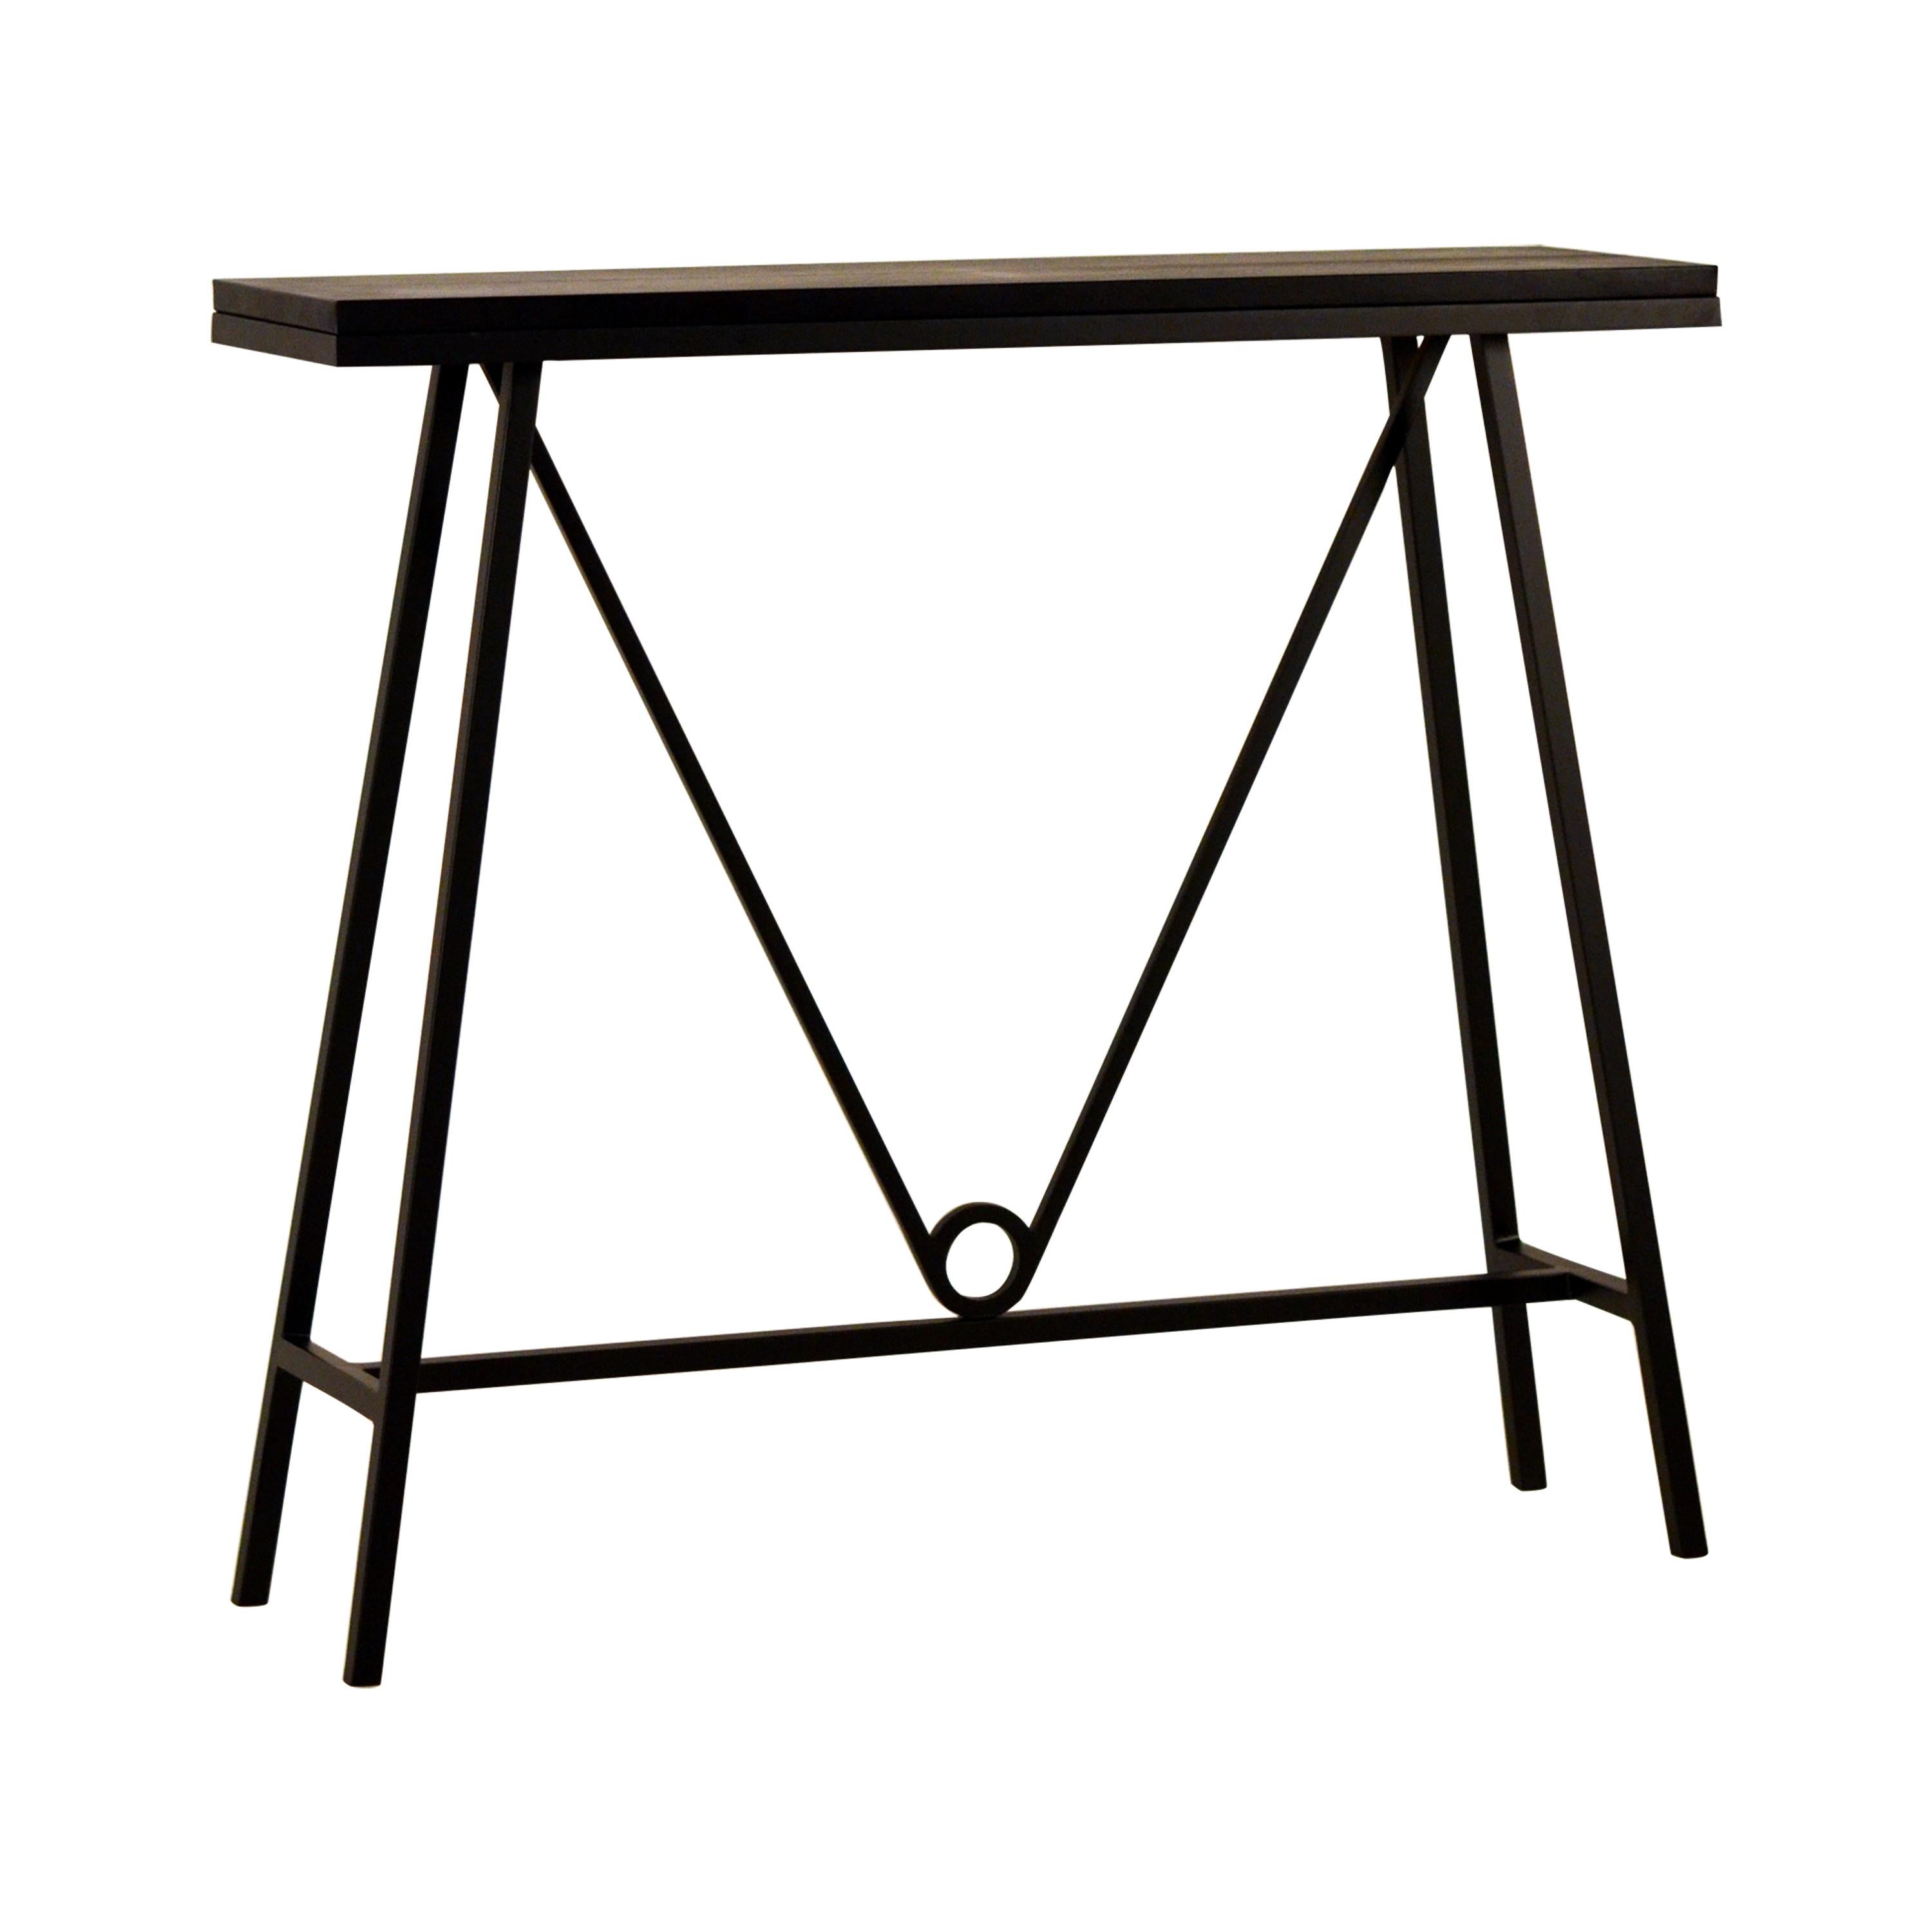 'Trapèze' Blackened Steel and Goatskin Console by Design Frères